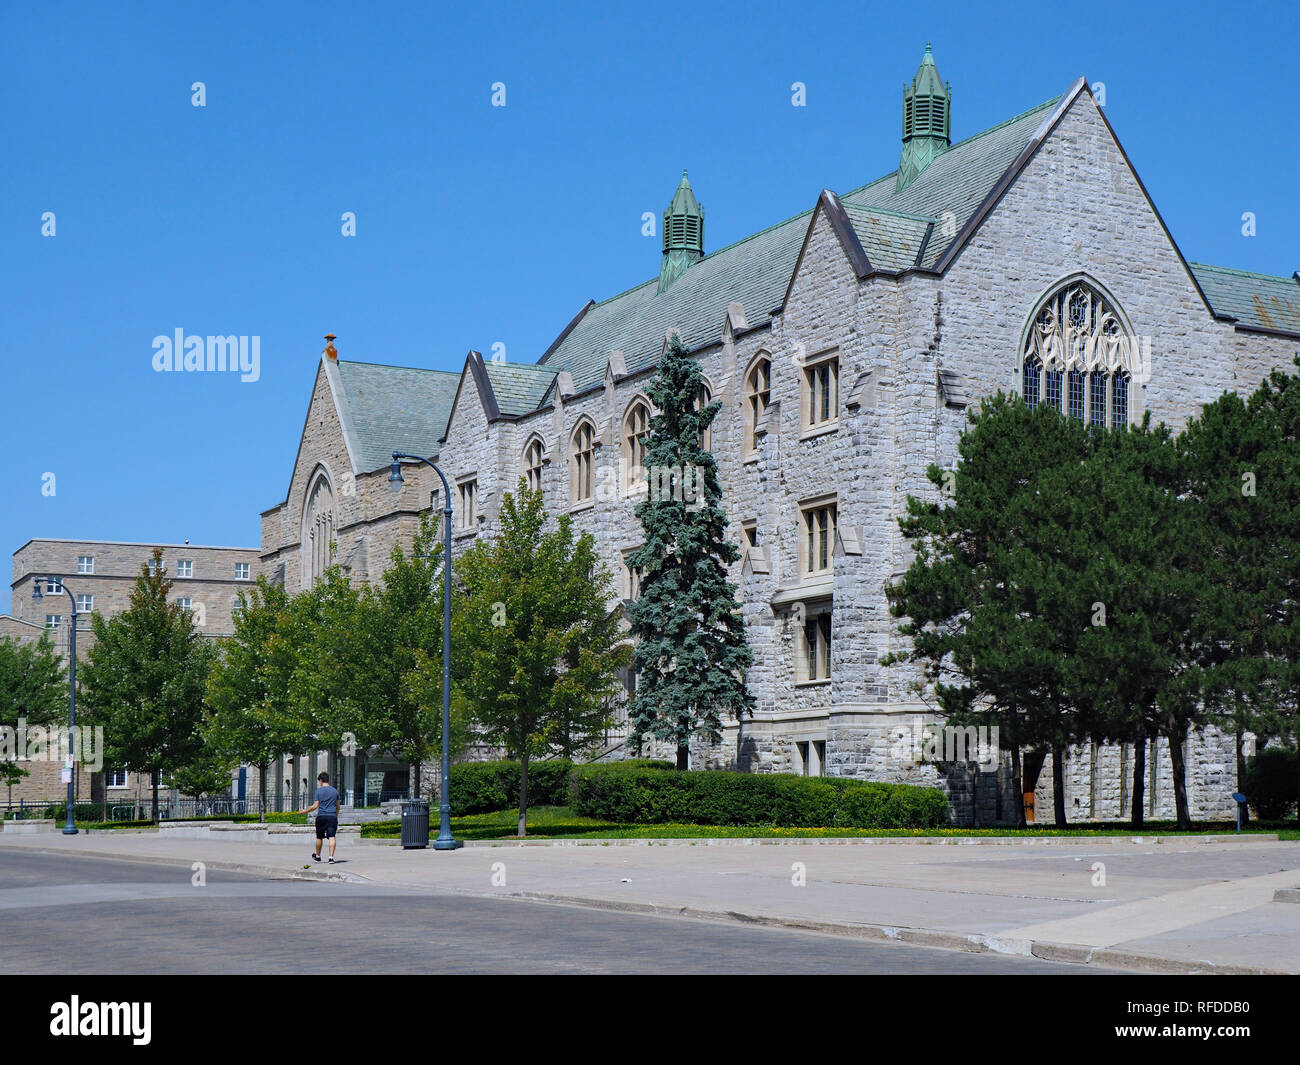 KINGSTON, ONTARIO, CANADA - Queen's University is one of Canada's oldest and most prestigious, with gothic stone buildings dating to the Victorian per Stock Photo